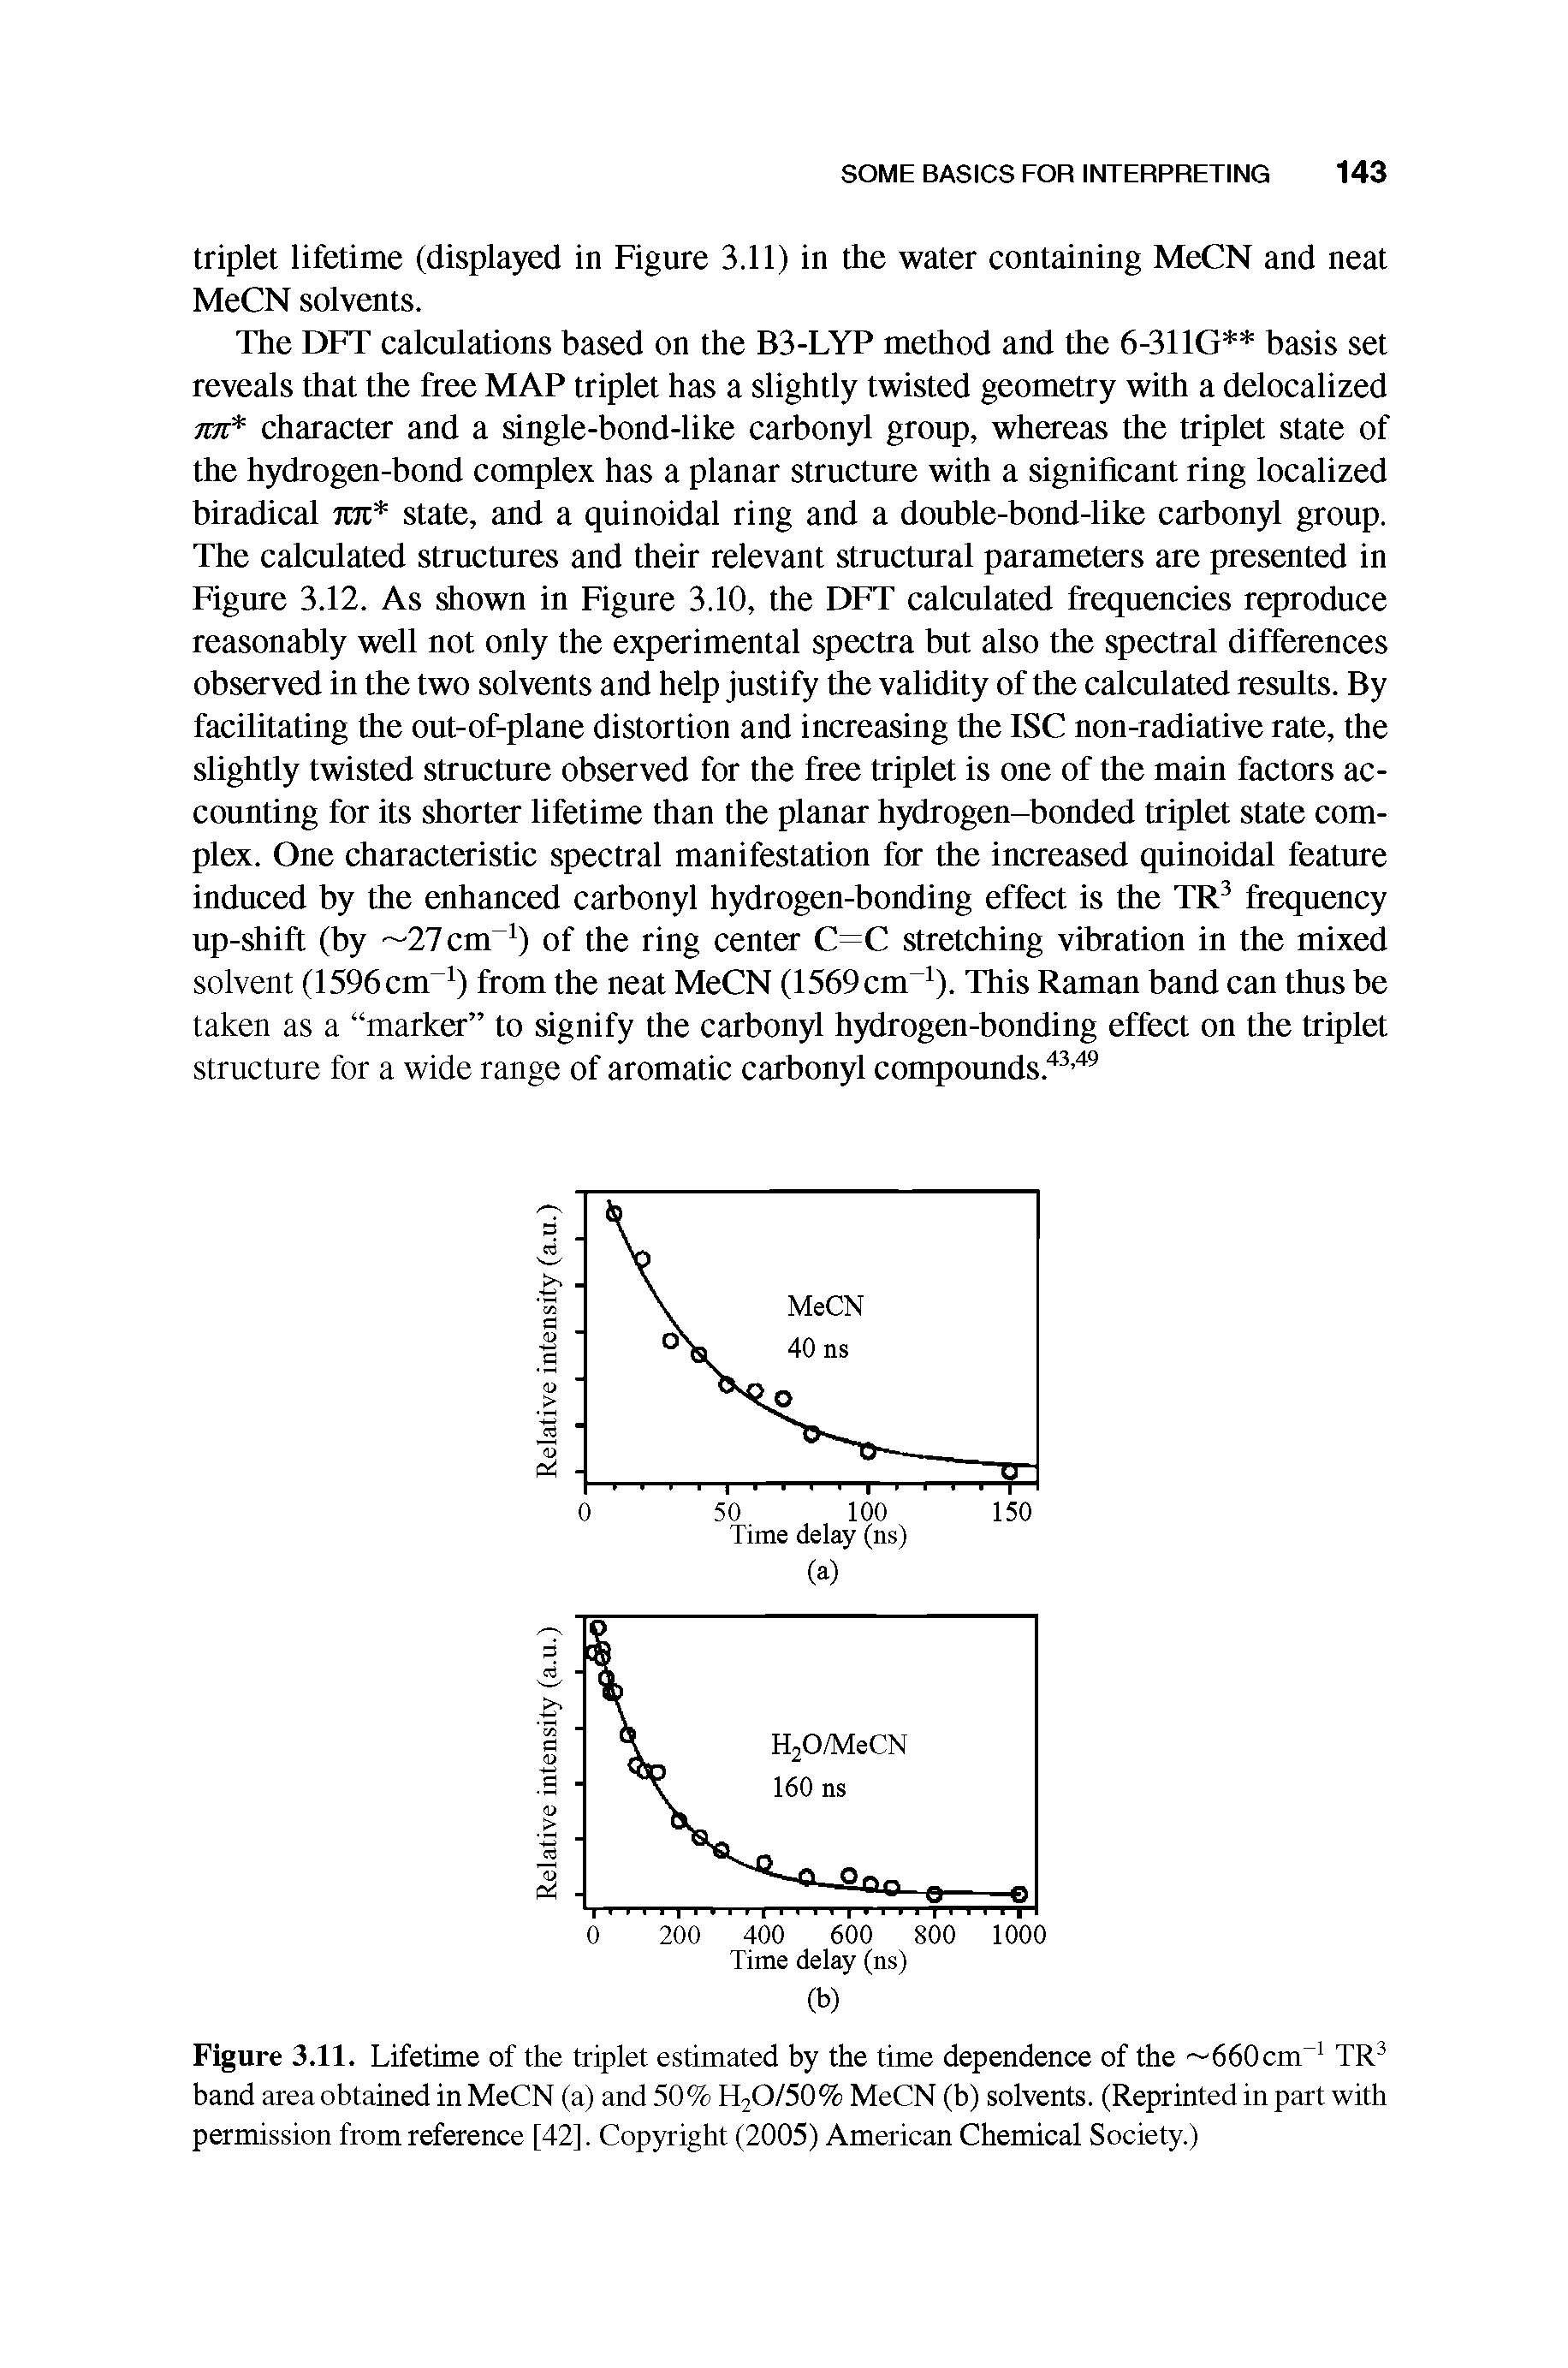 Figure 3.11. Lifetime of the triplet estimated by the time dependence of the 660cm TR band area obtained in MeCN (a) and 50% H2O/50% MeCN (b) solvents. (Reprinted in part with permission from reference [42]. Copyright (2005) American Chemical Society.)...